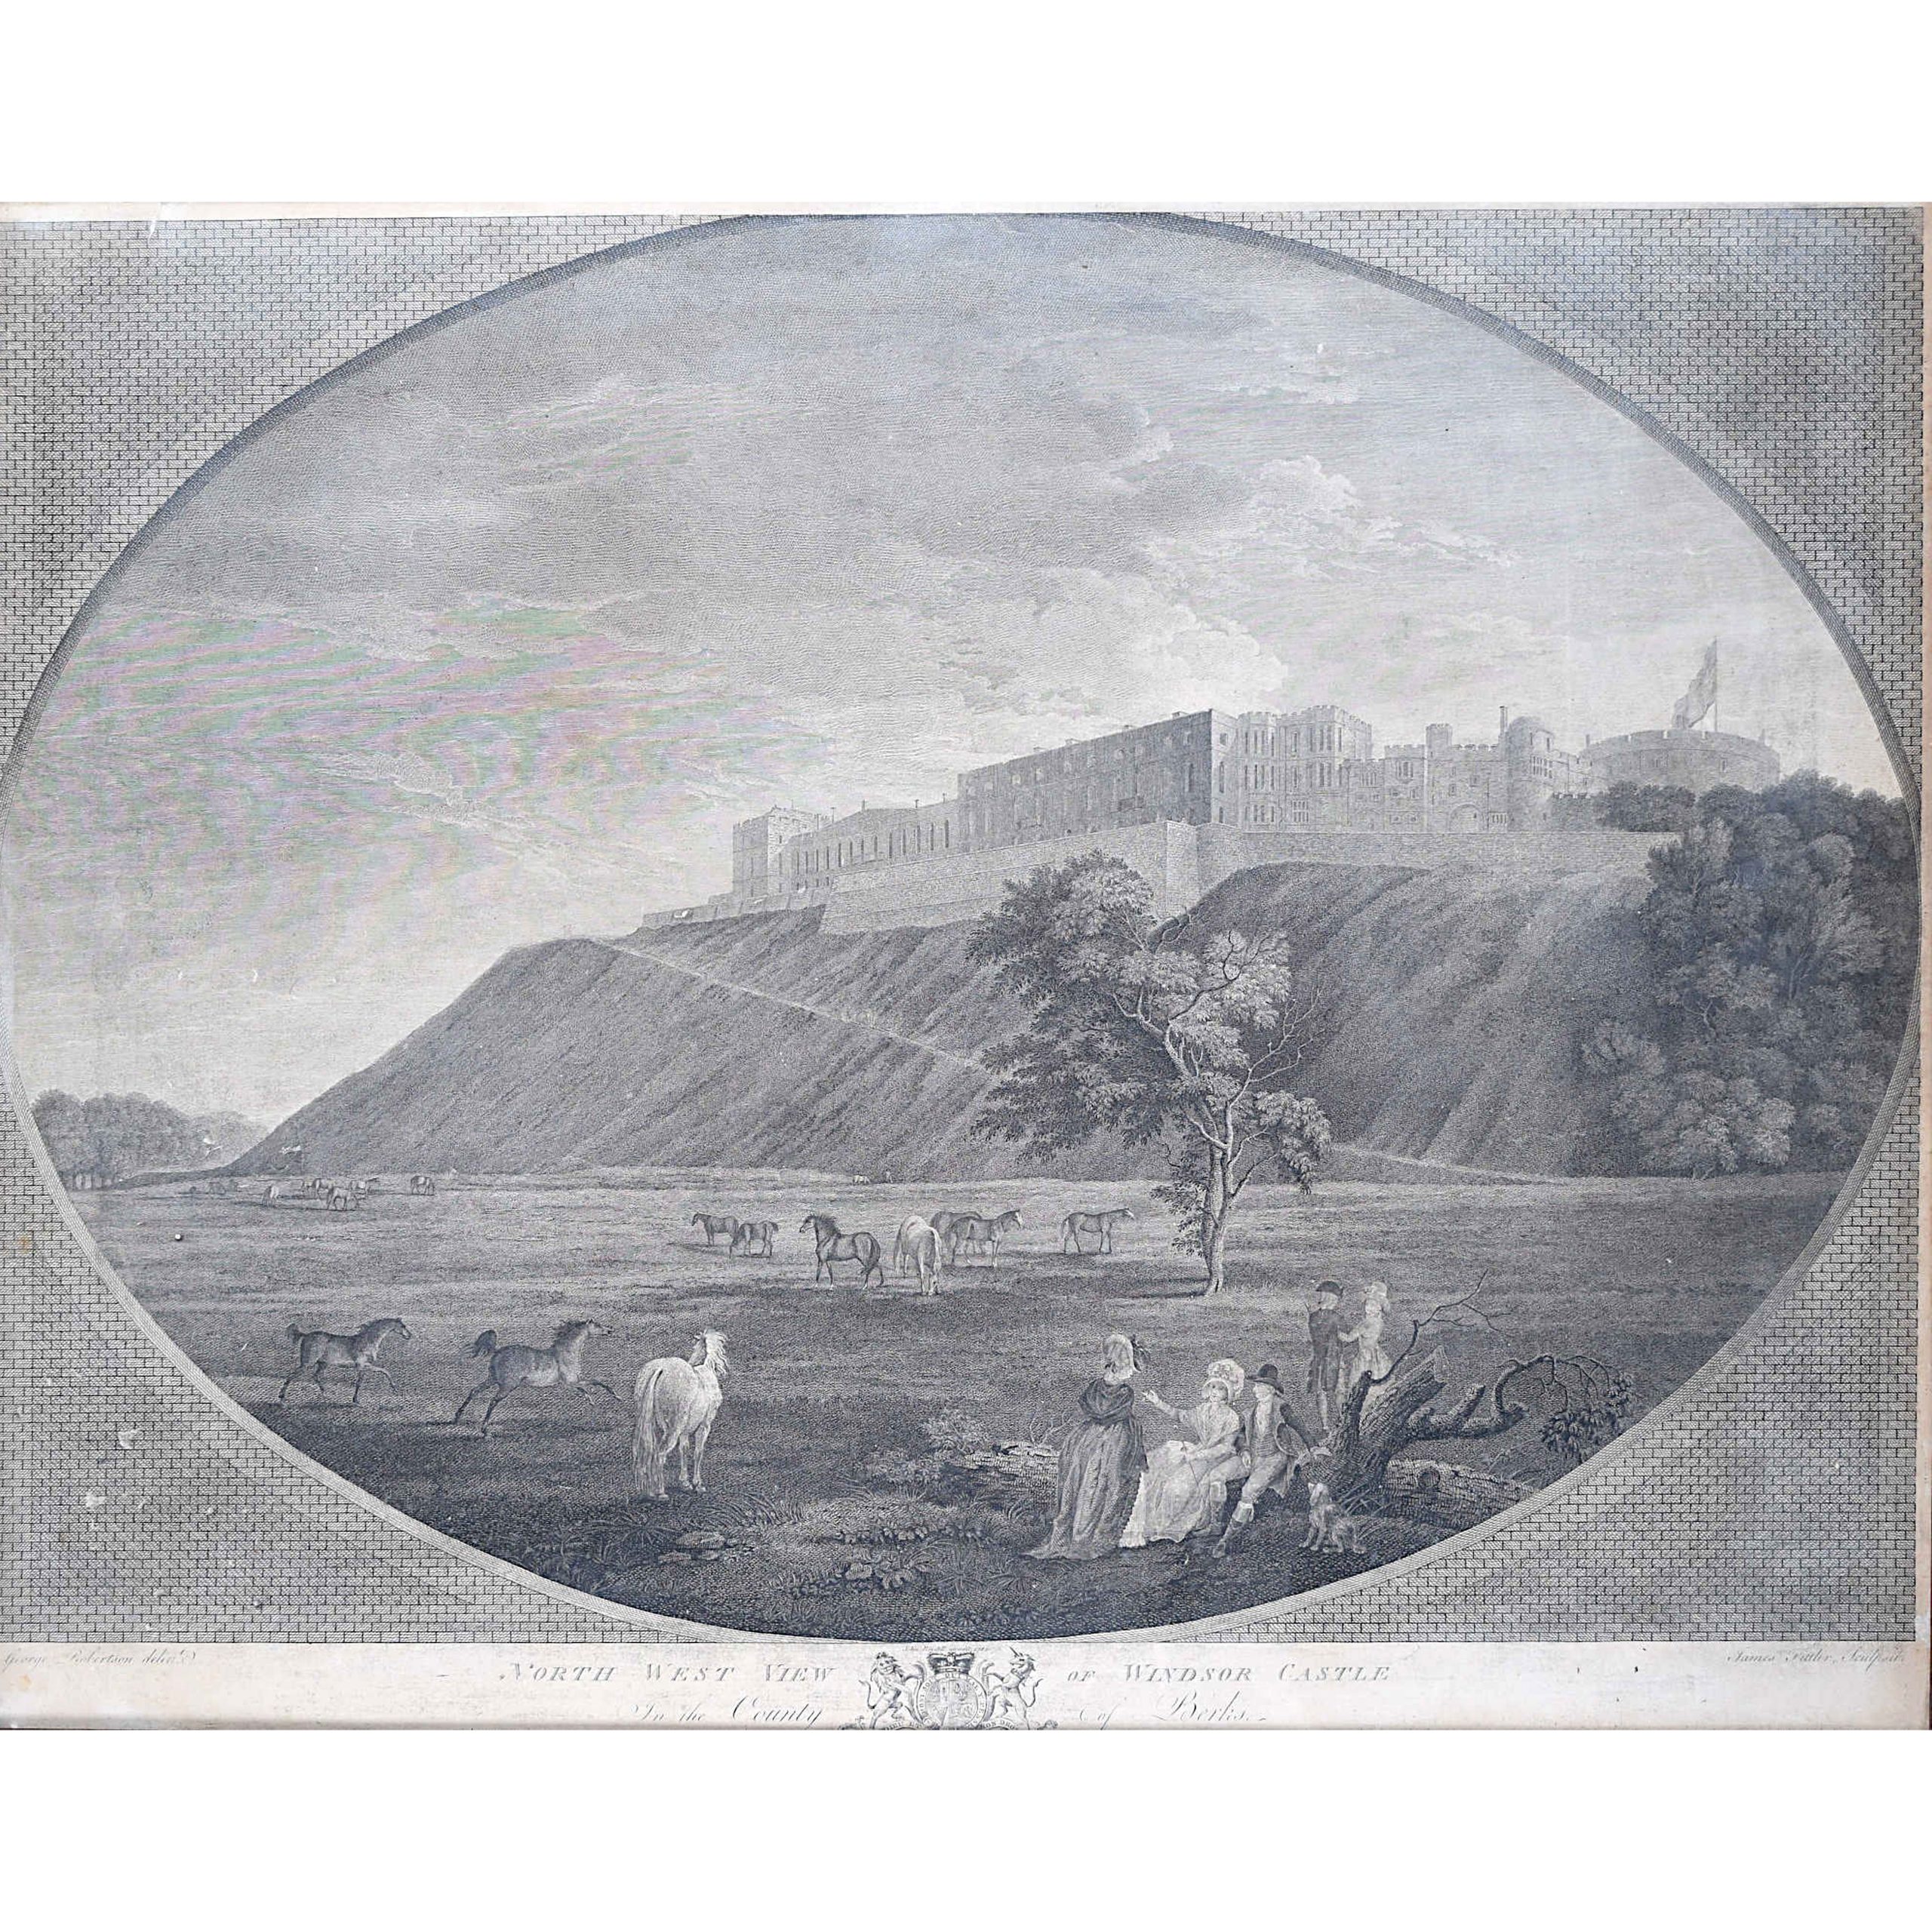 James Fittler, North West View of Windsor Castle in the County of Berks (1782)